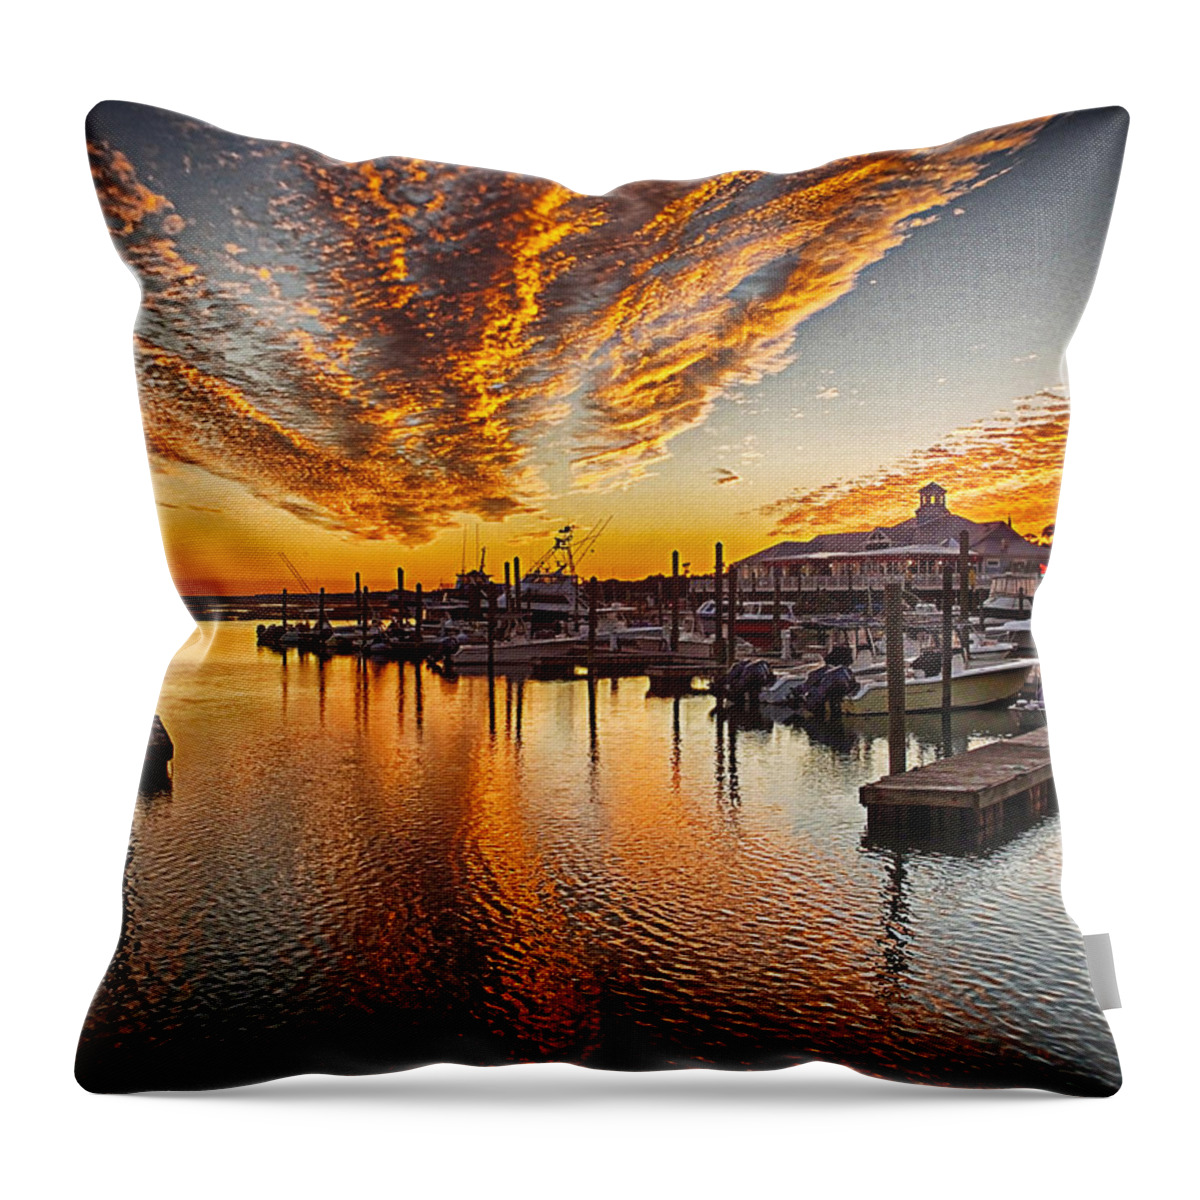 Sunset Throw Pillow featuring the photograph Marshwalk Sunset by Bill Barber